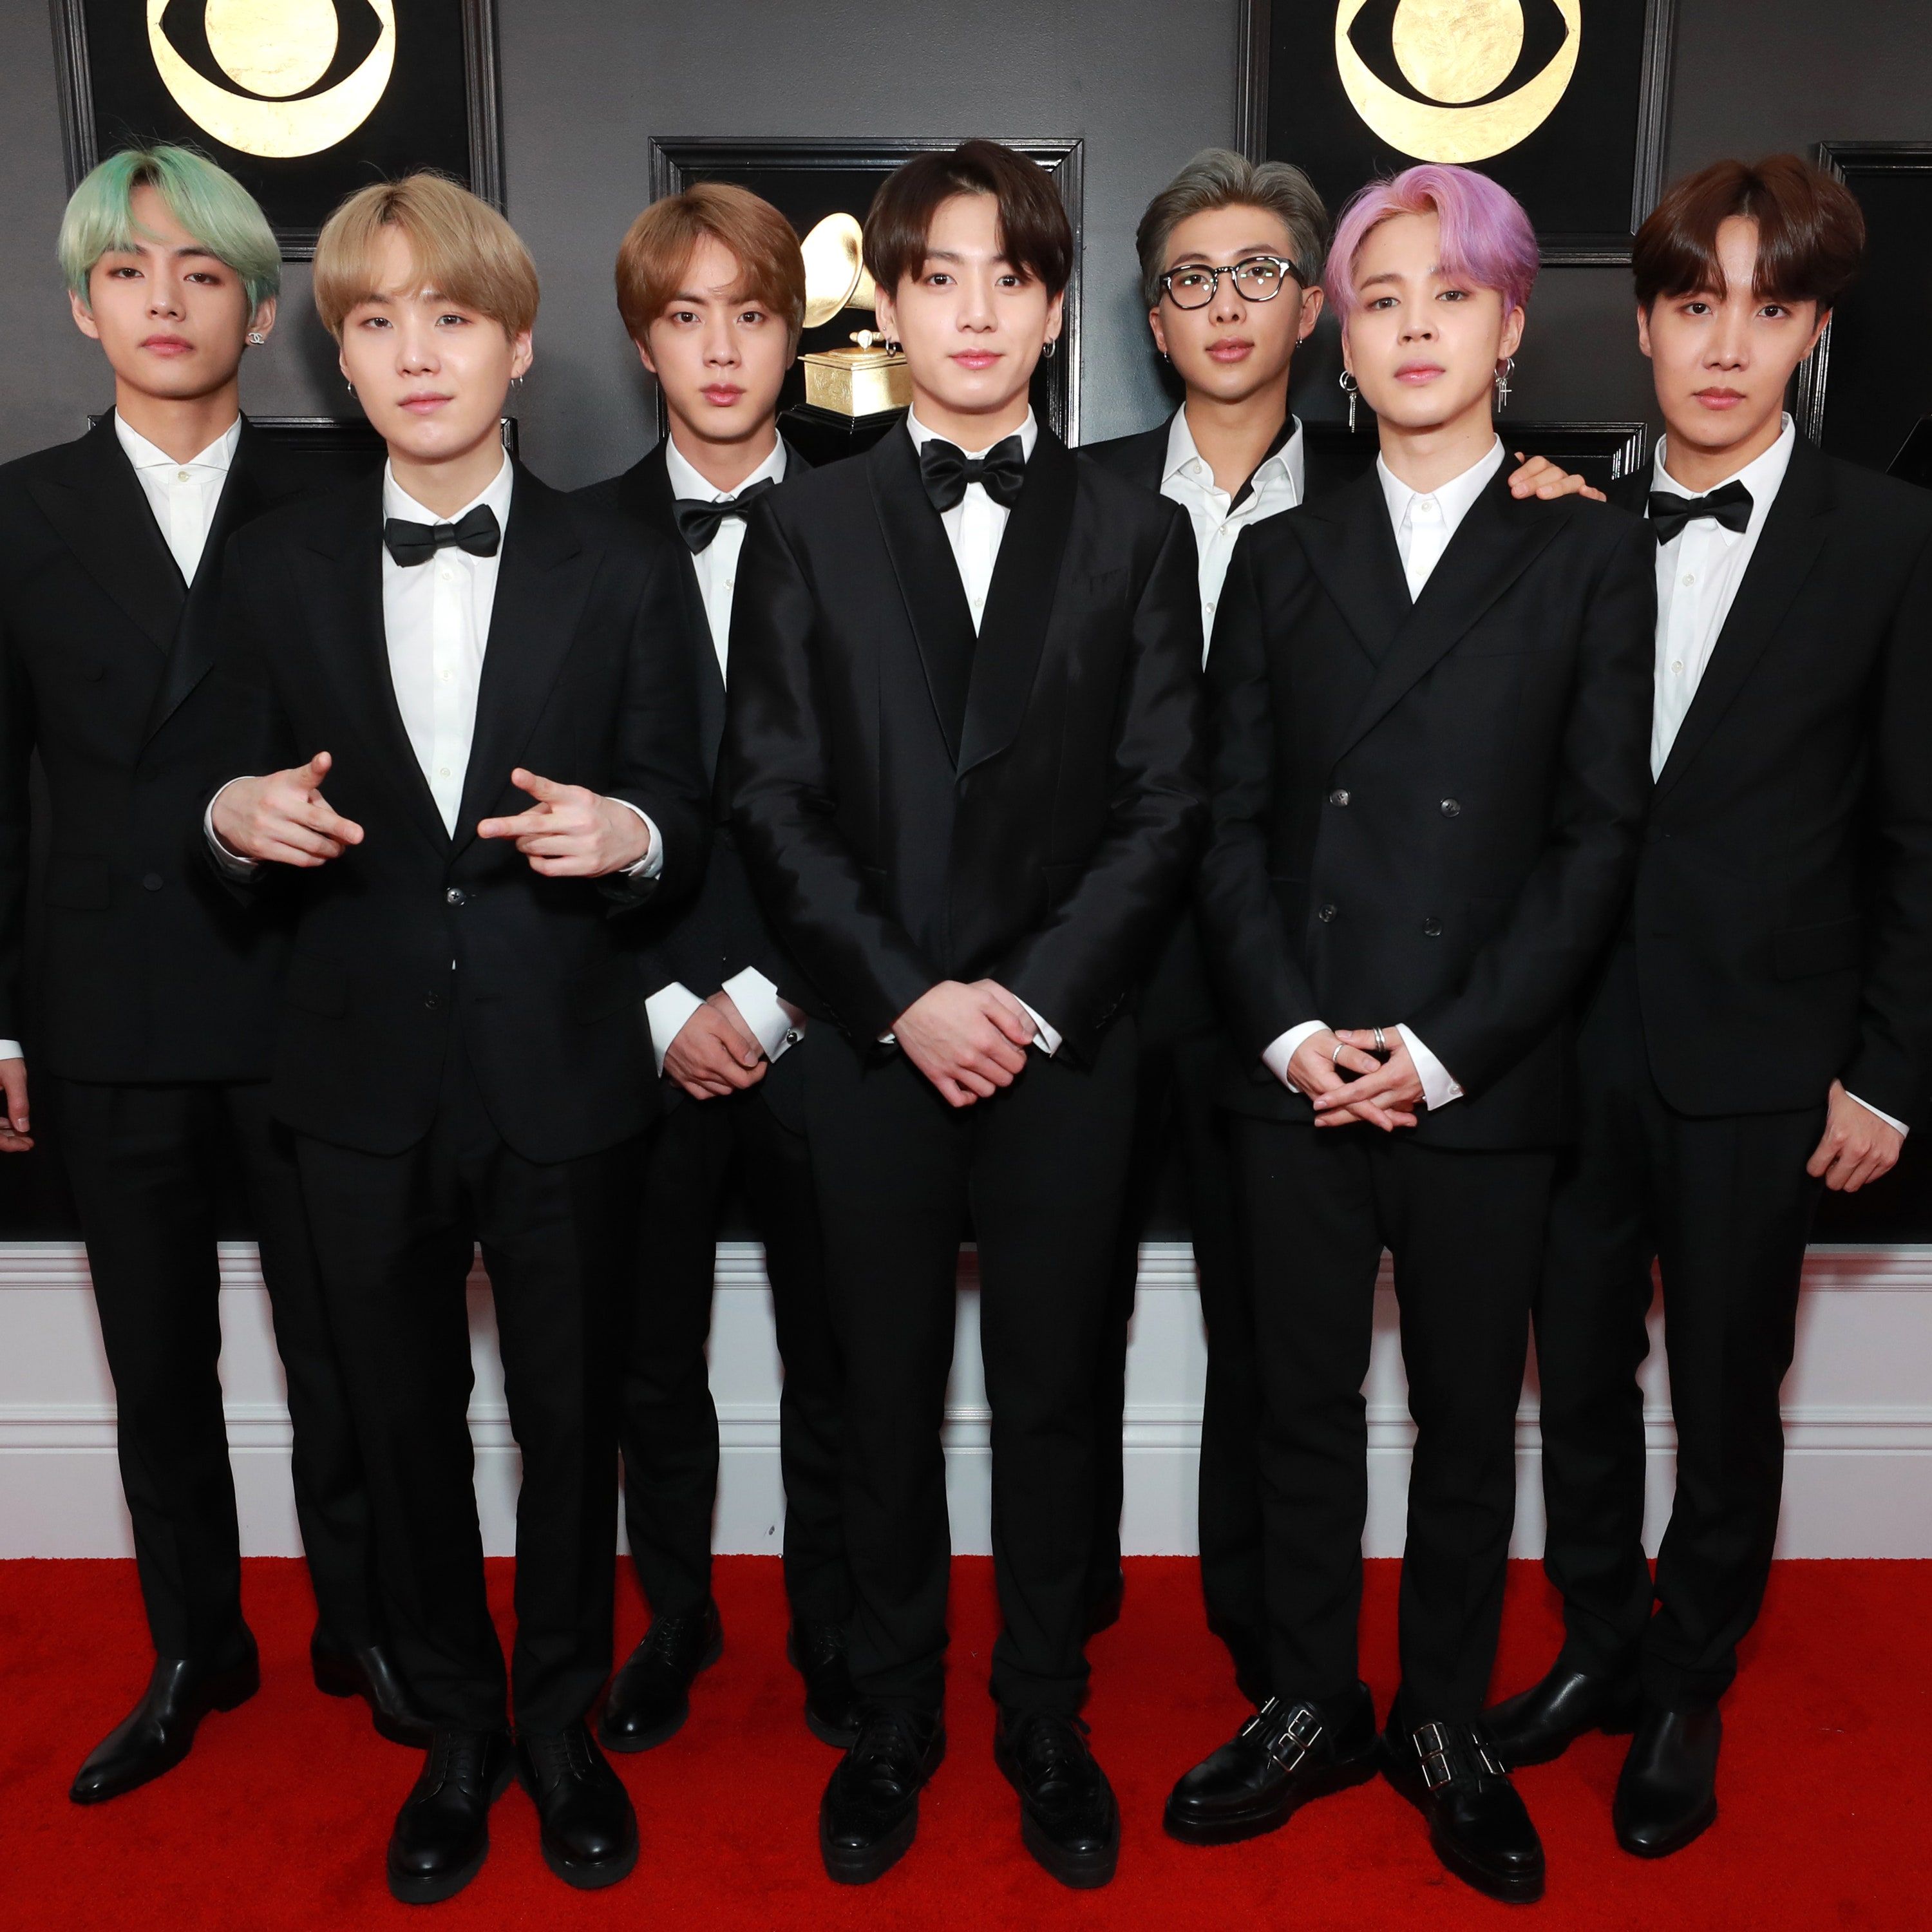 Outfits BTS Wore to the 2019 Grammy Awards Will Be on Display